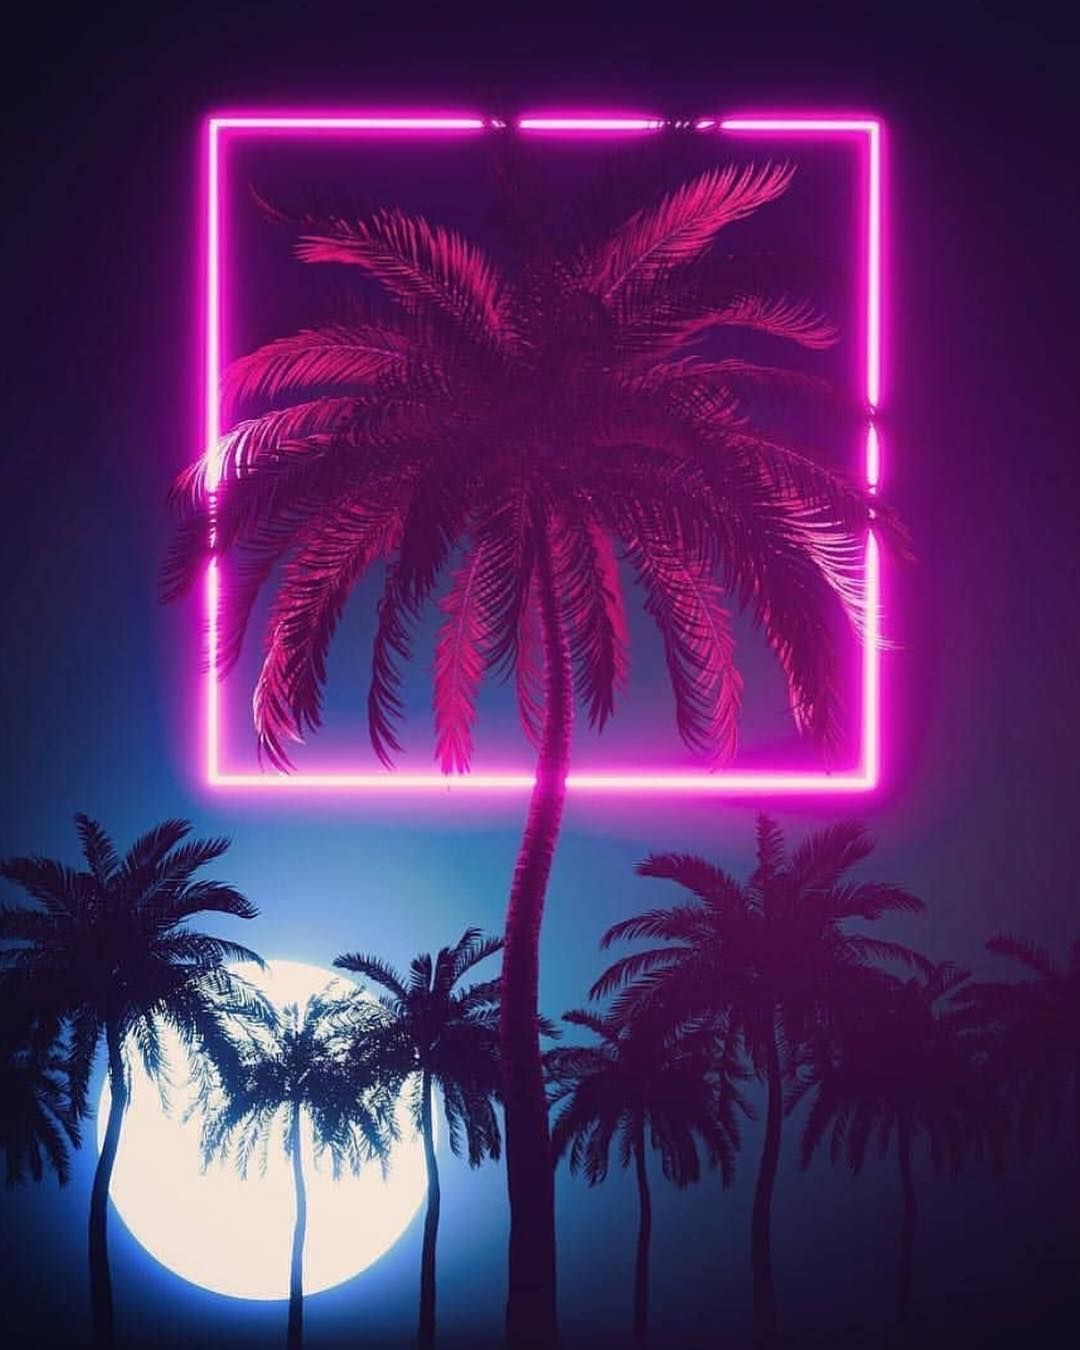 Neon Lights Palms New Retrowave Synthwave. Synthwave art